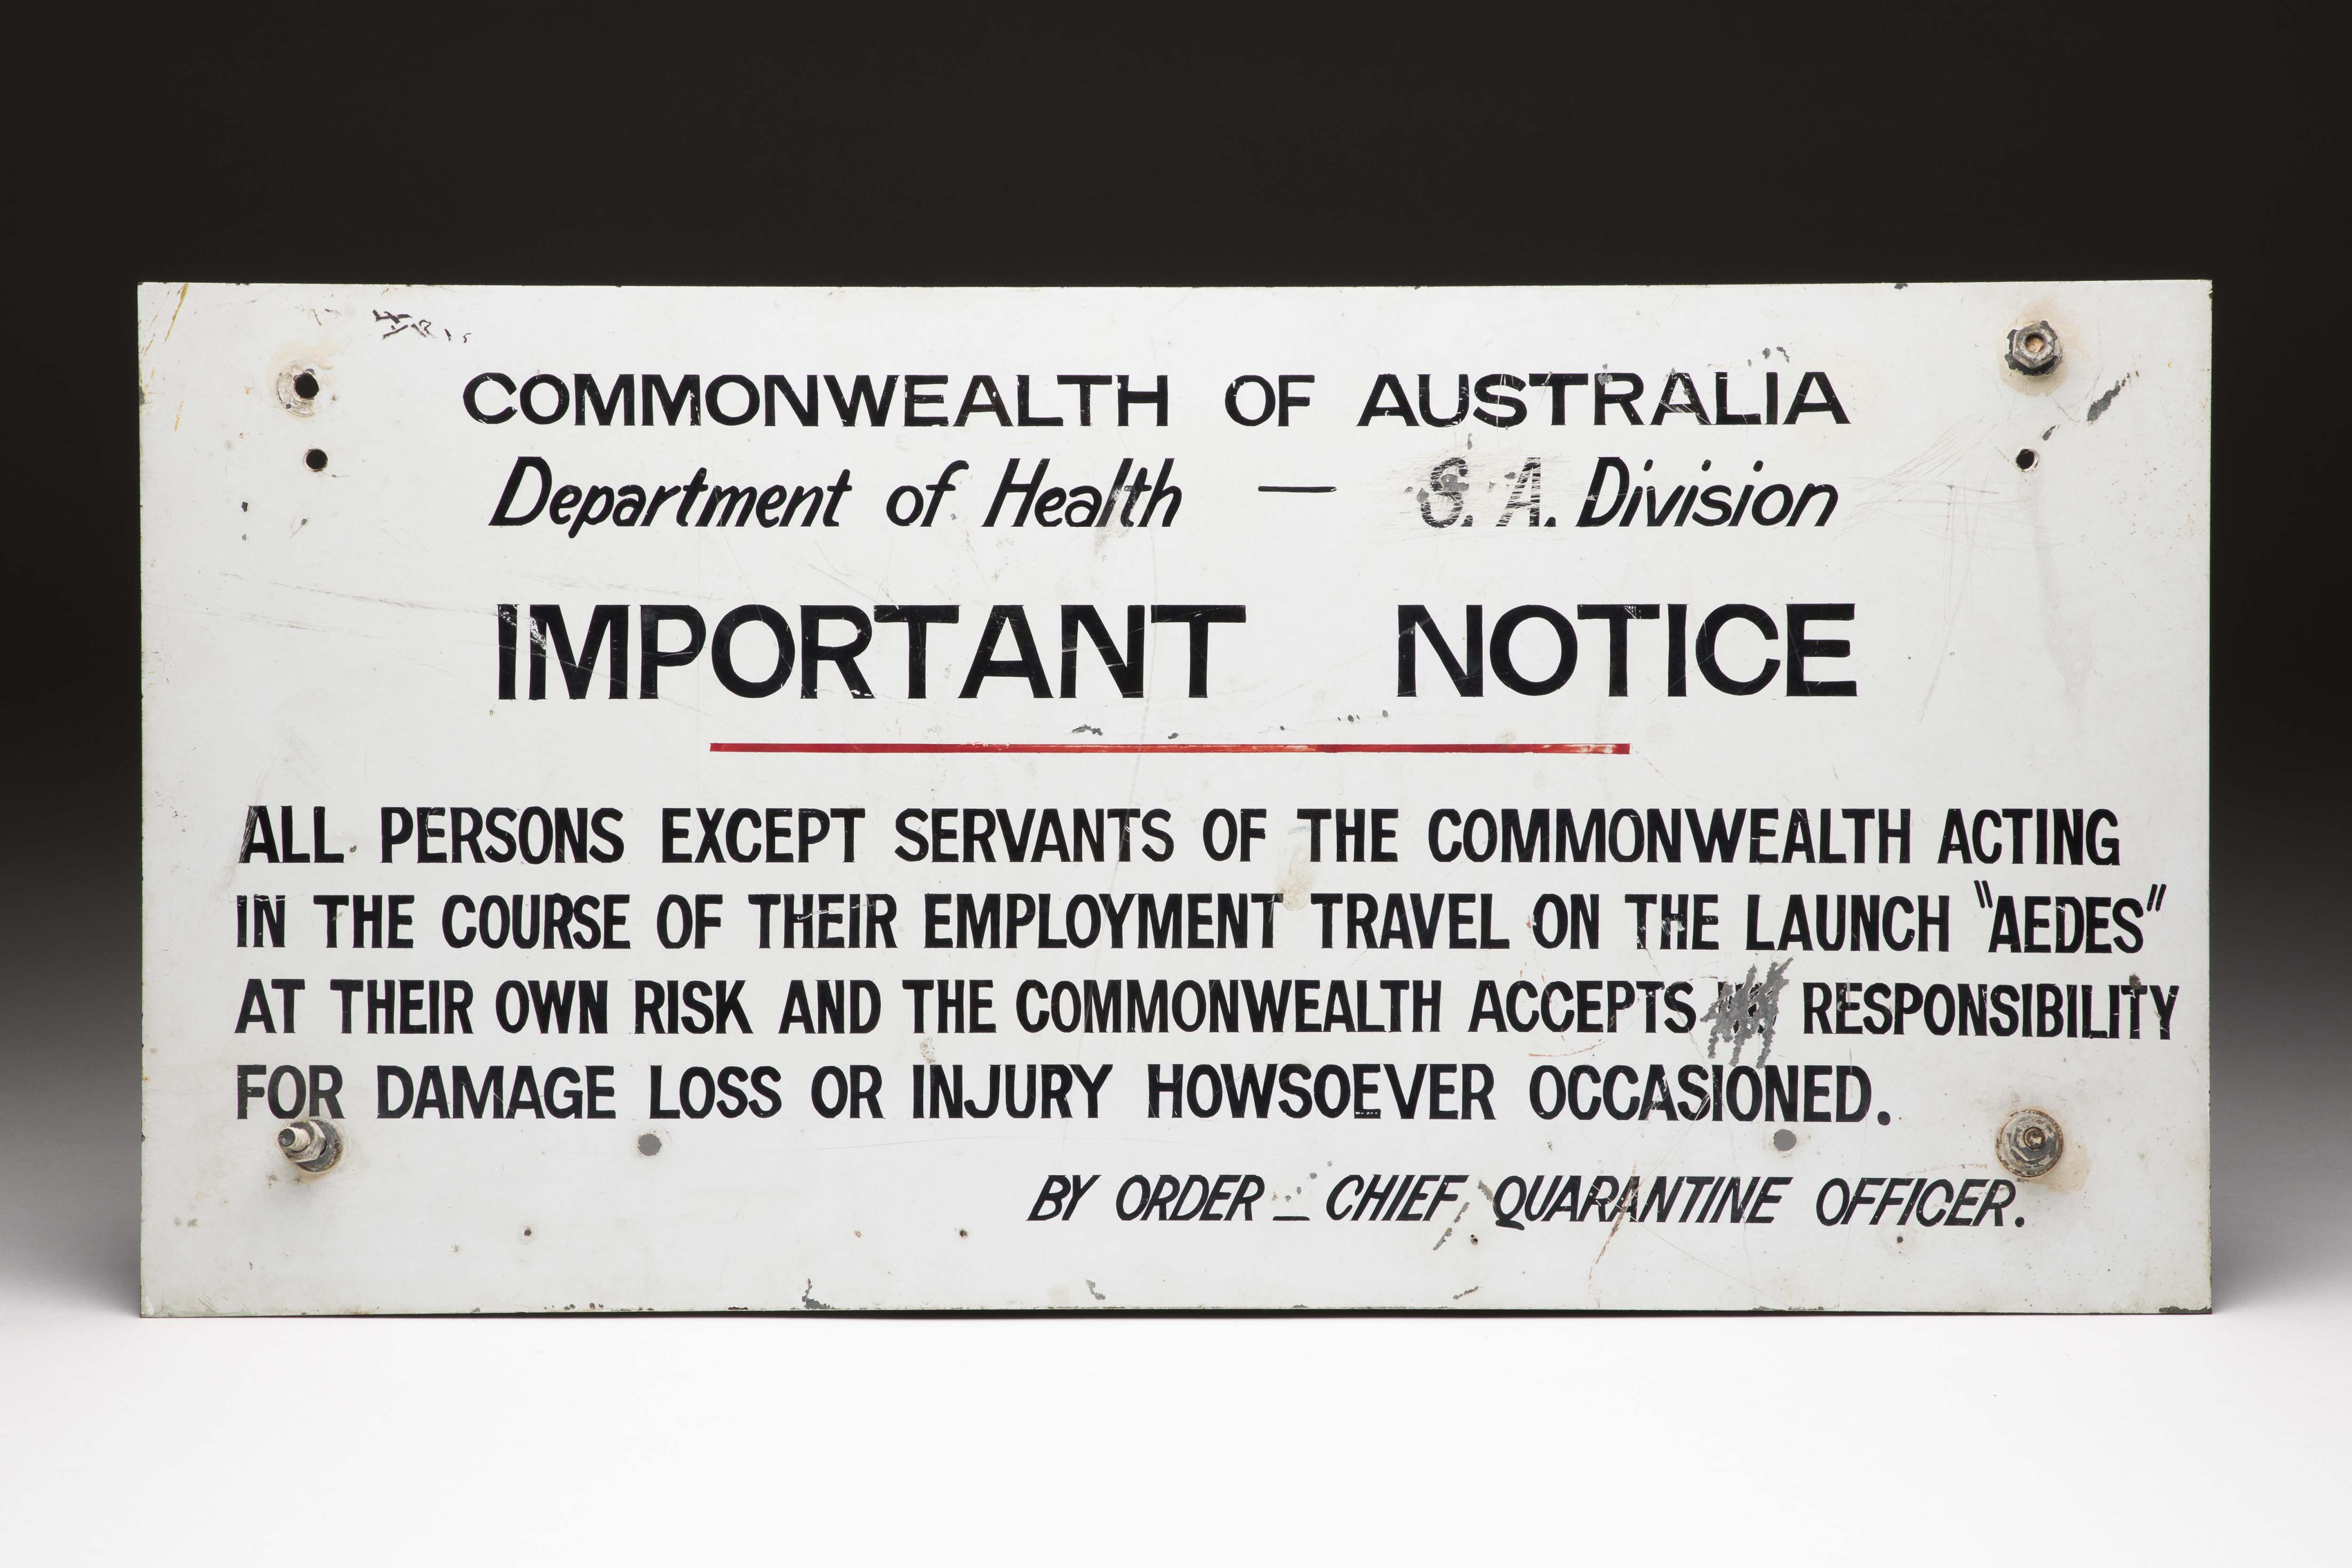 A warning sign from the boat that took passengers to the Torrens Island Quarantine Station in South Australia. The station was built in 1879 to stop passengers bringing diseases such as smallpox into Adelaide.